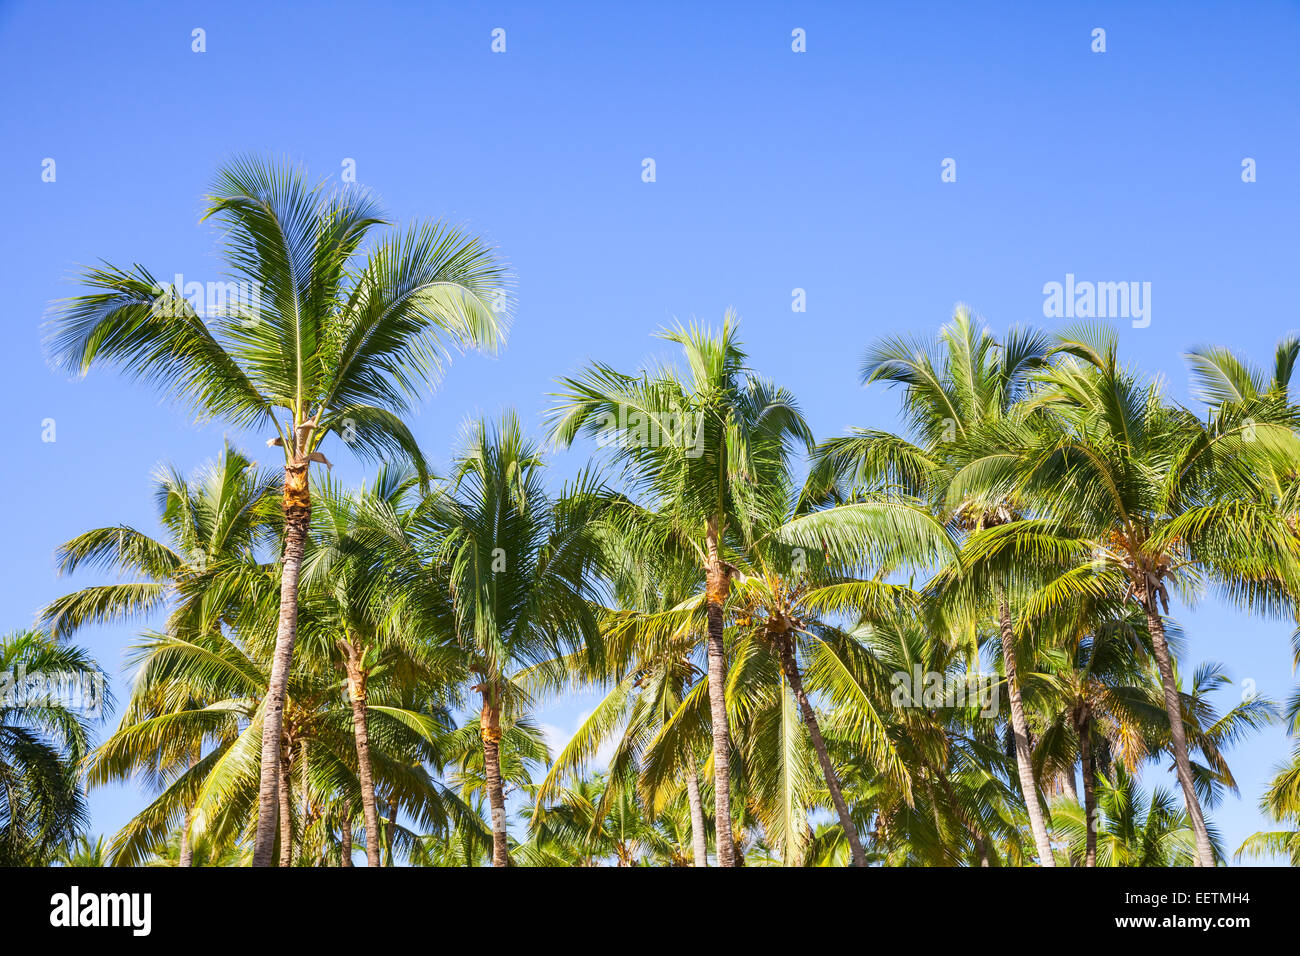 Forest of coconut palm trees over clear blue sky background Stock Photo